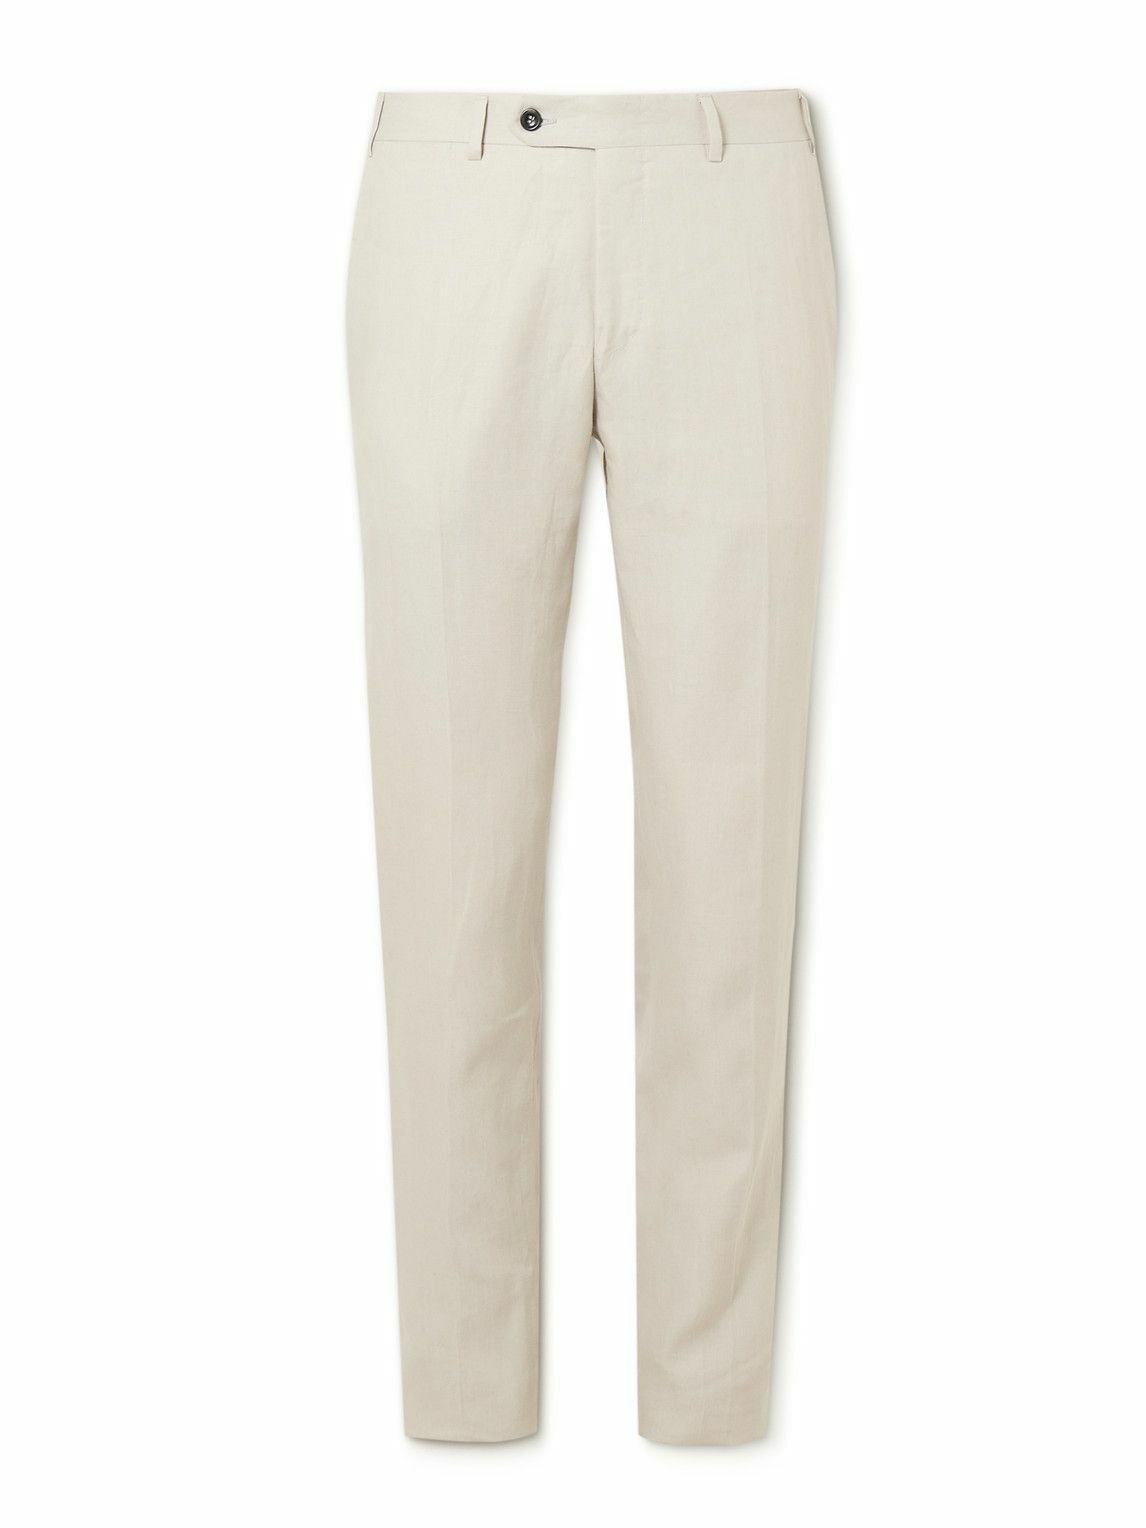 Canali - Slim-Fit Straight-Leg Linen Suit Trousers - Gray Canali